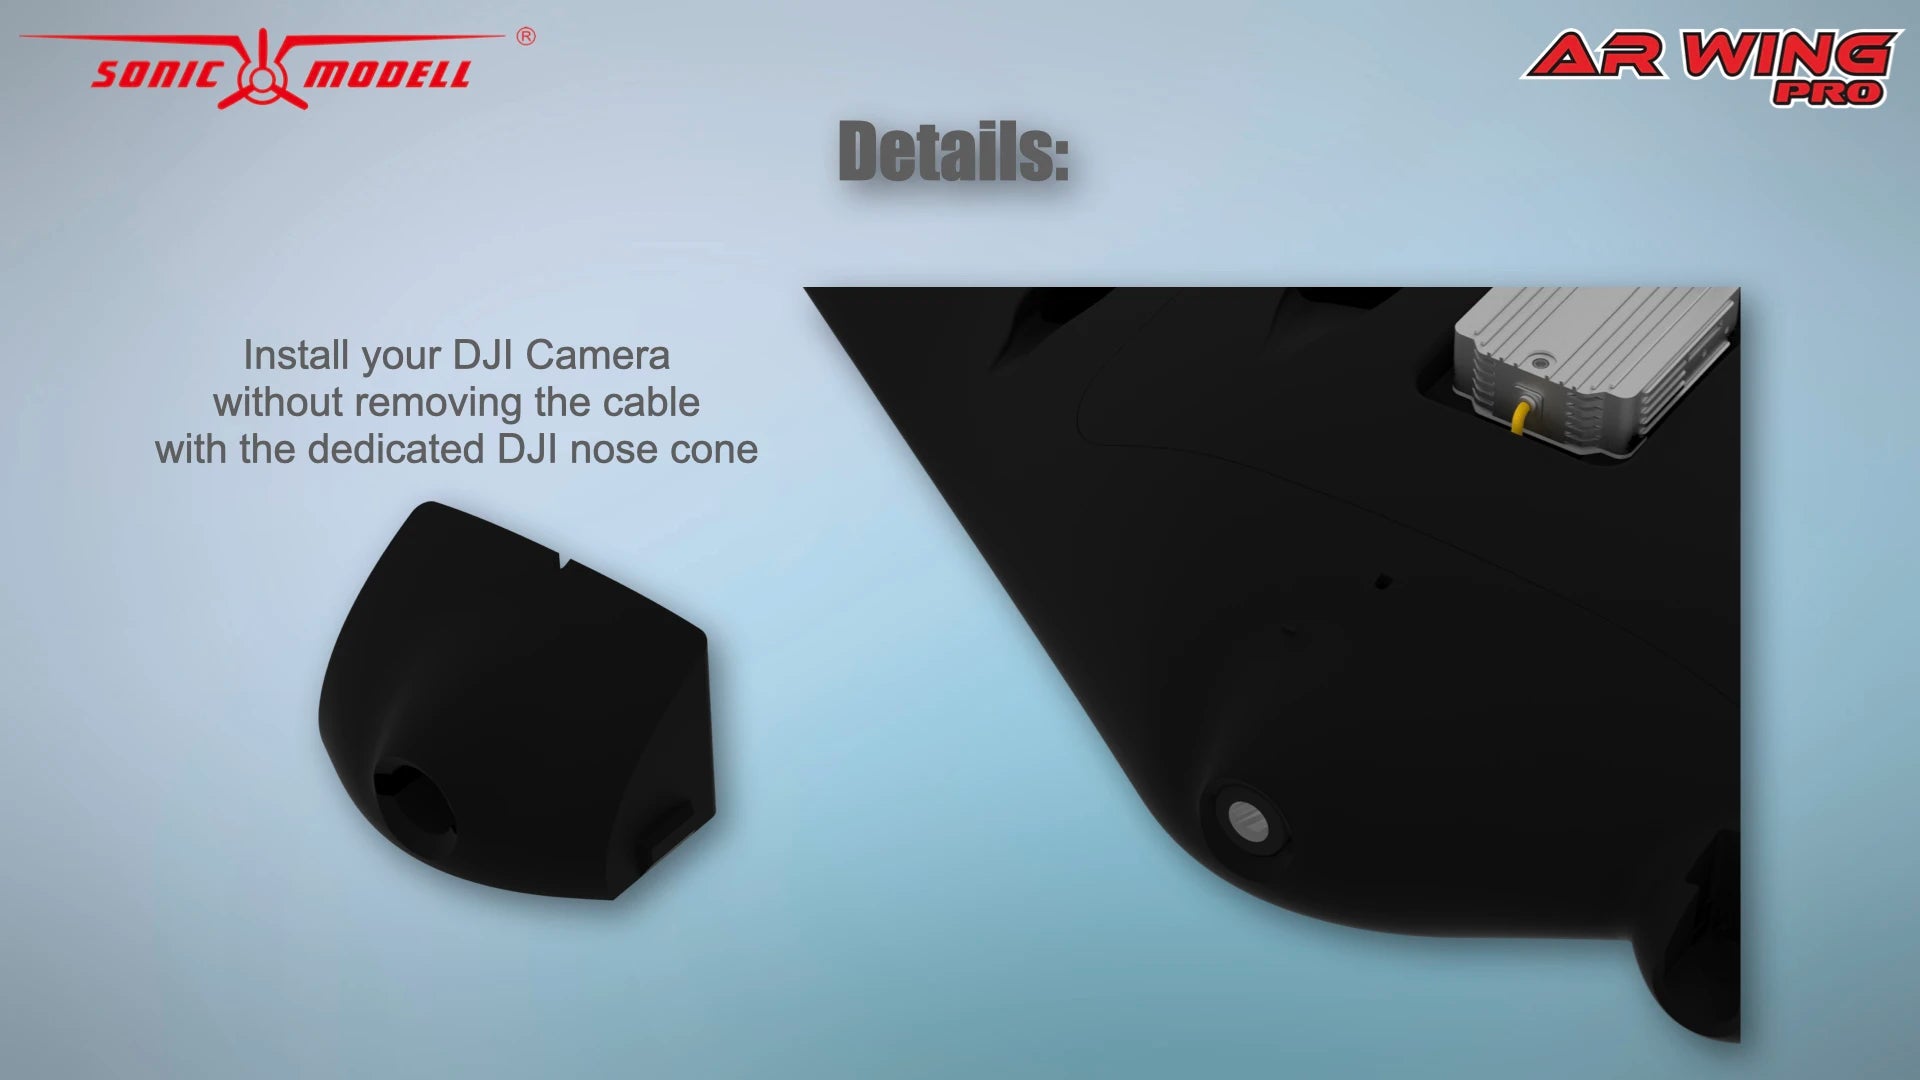 somic MODELL ARWING PRO Install your DJI Camera without removing the cable with